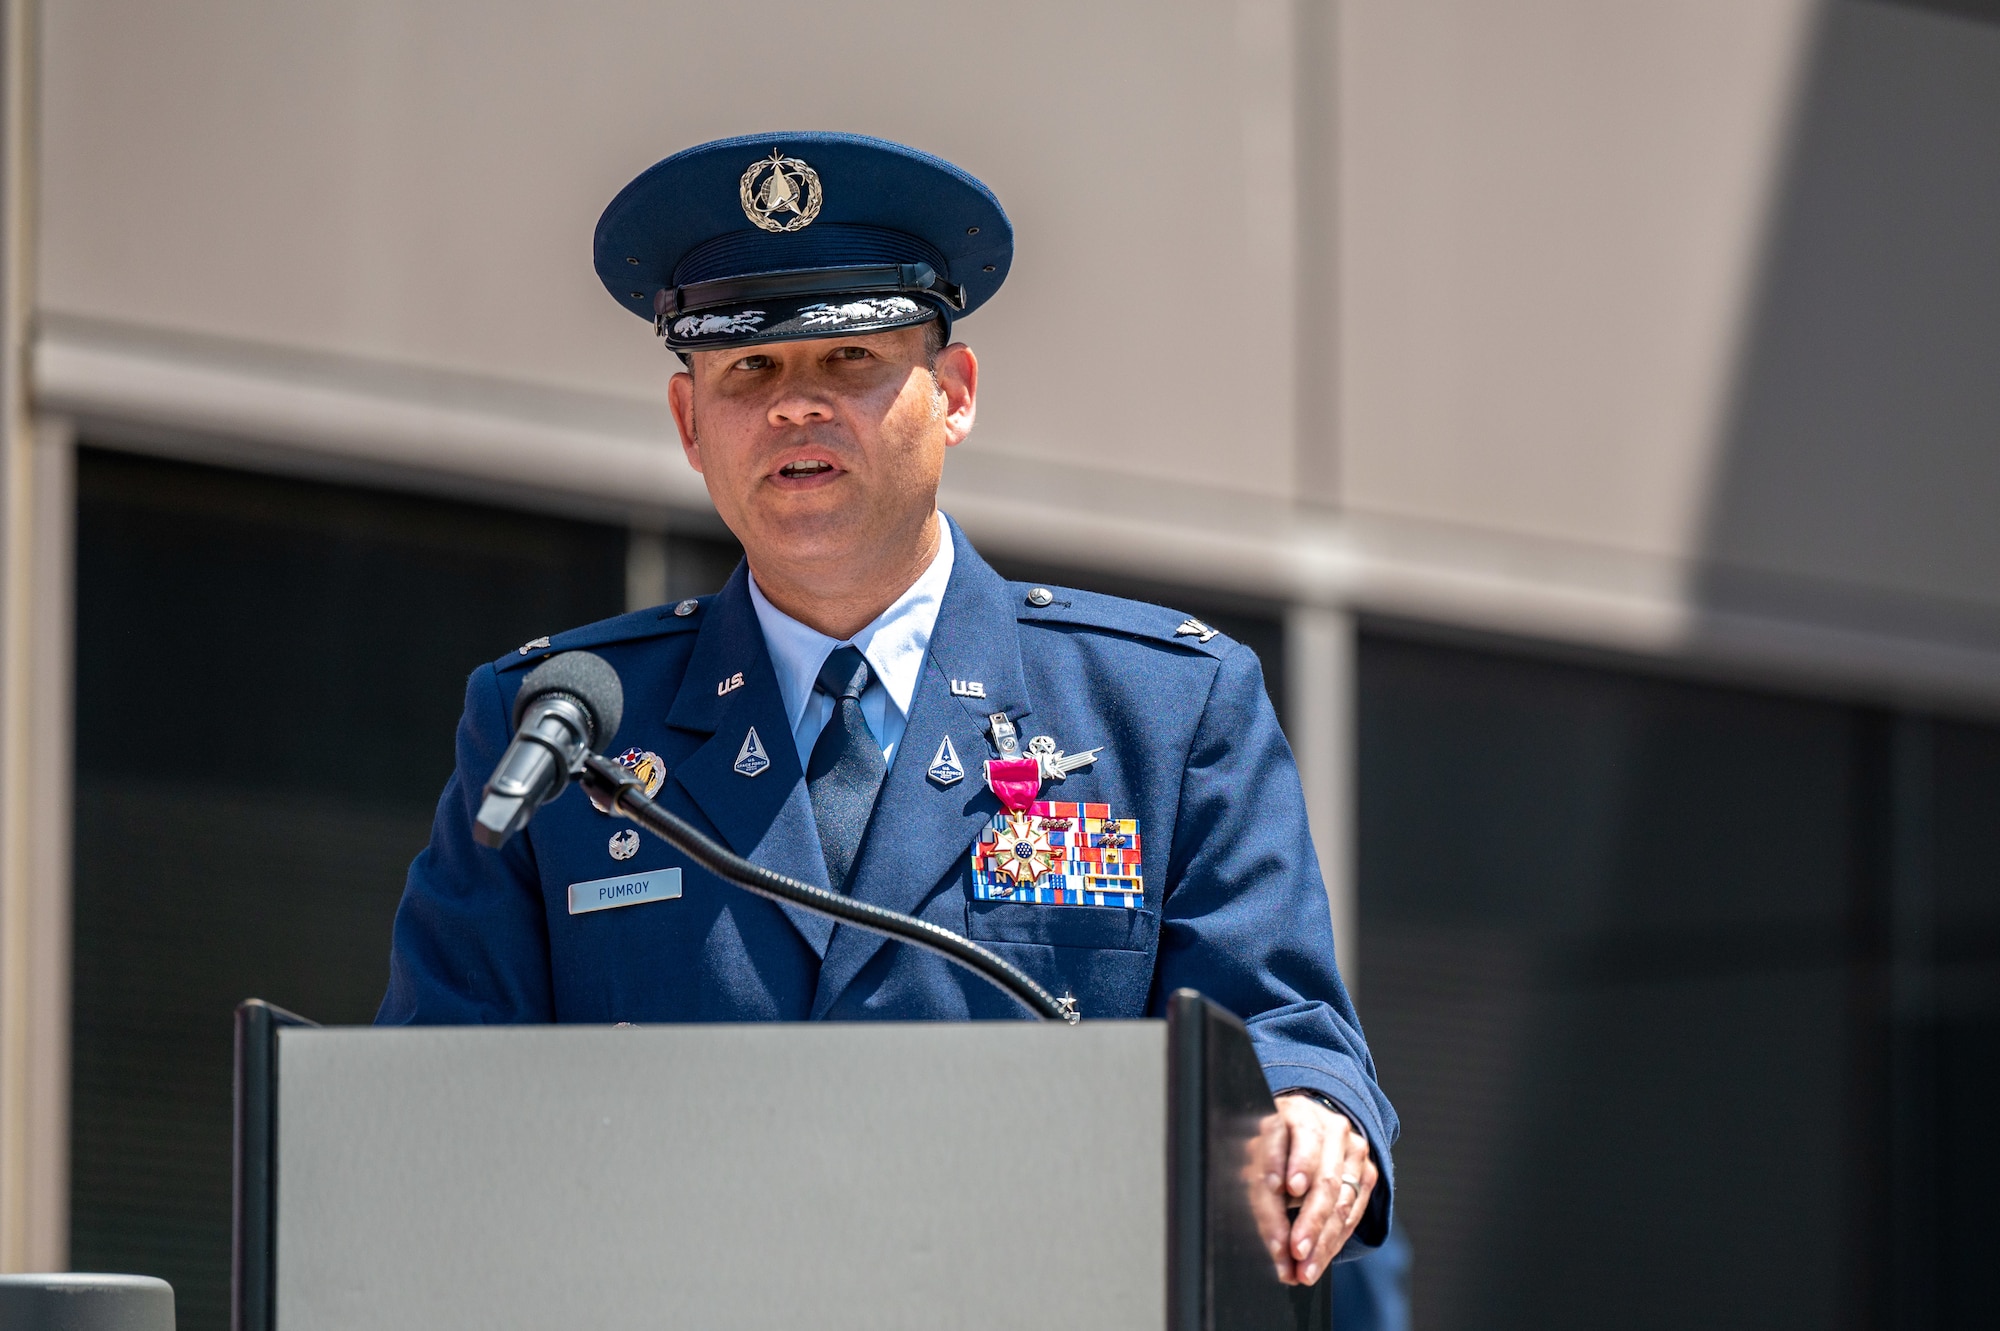 U.S. Space Force Col. Kyle Pumroy, the Delta 11 outgoing commander, delivers remarks during Delta 11’s change of command ceremony at Schriever Space Force Base, Colorado, July 7, 2023. Delta 11 is responsible for delivering realistic, threat-informed test and training resources to U.S. Space Force, joint, and coalition space operators via live, virtual, and constructive threat replication, leveraging the National Space Test and Training Complex across multiple space warfighting disciplines. (U.S. Space Force photo by Ethan Johnson)